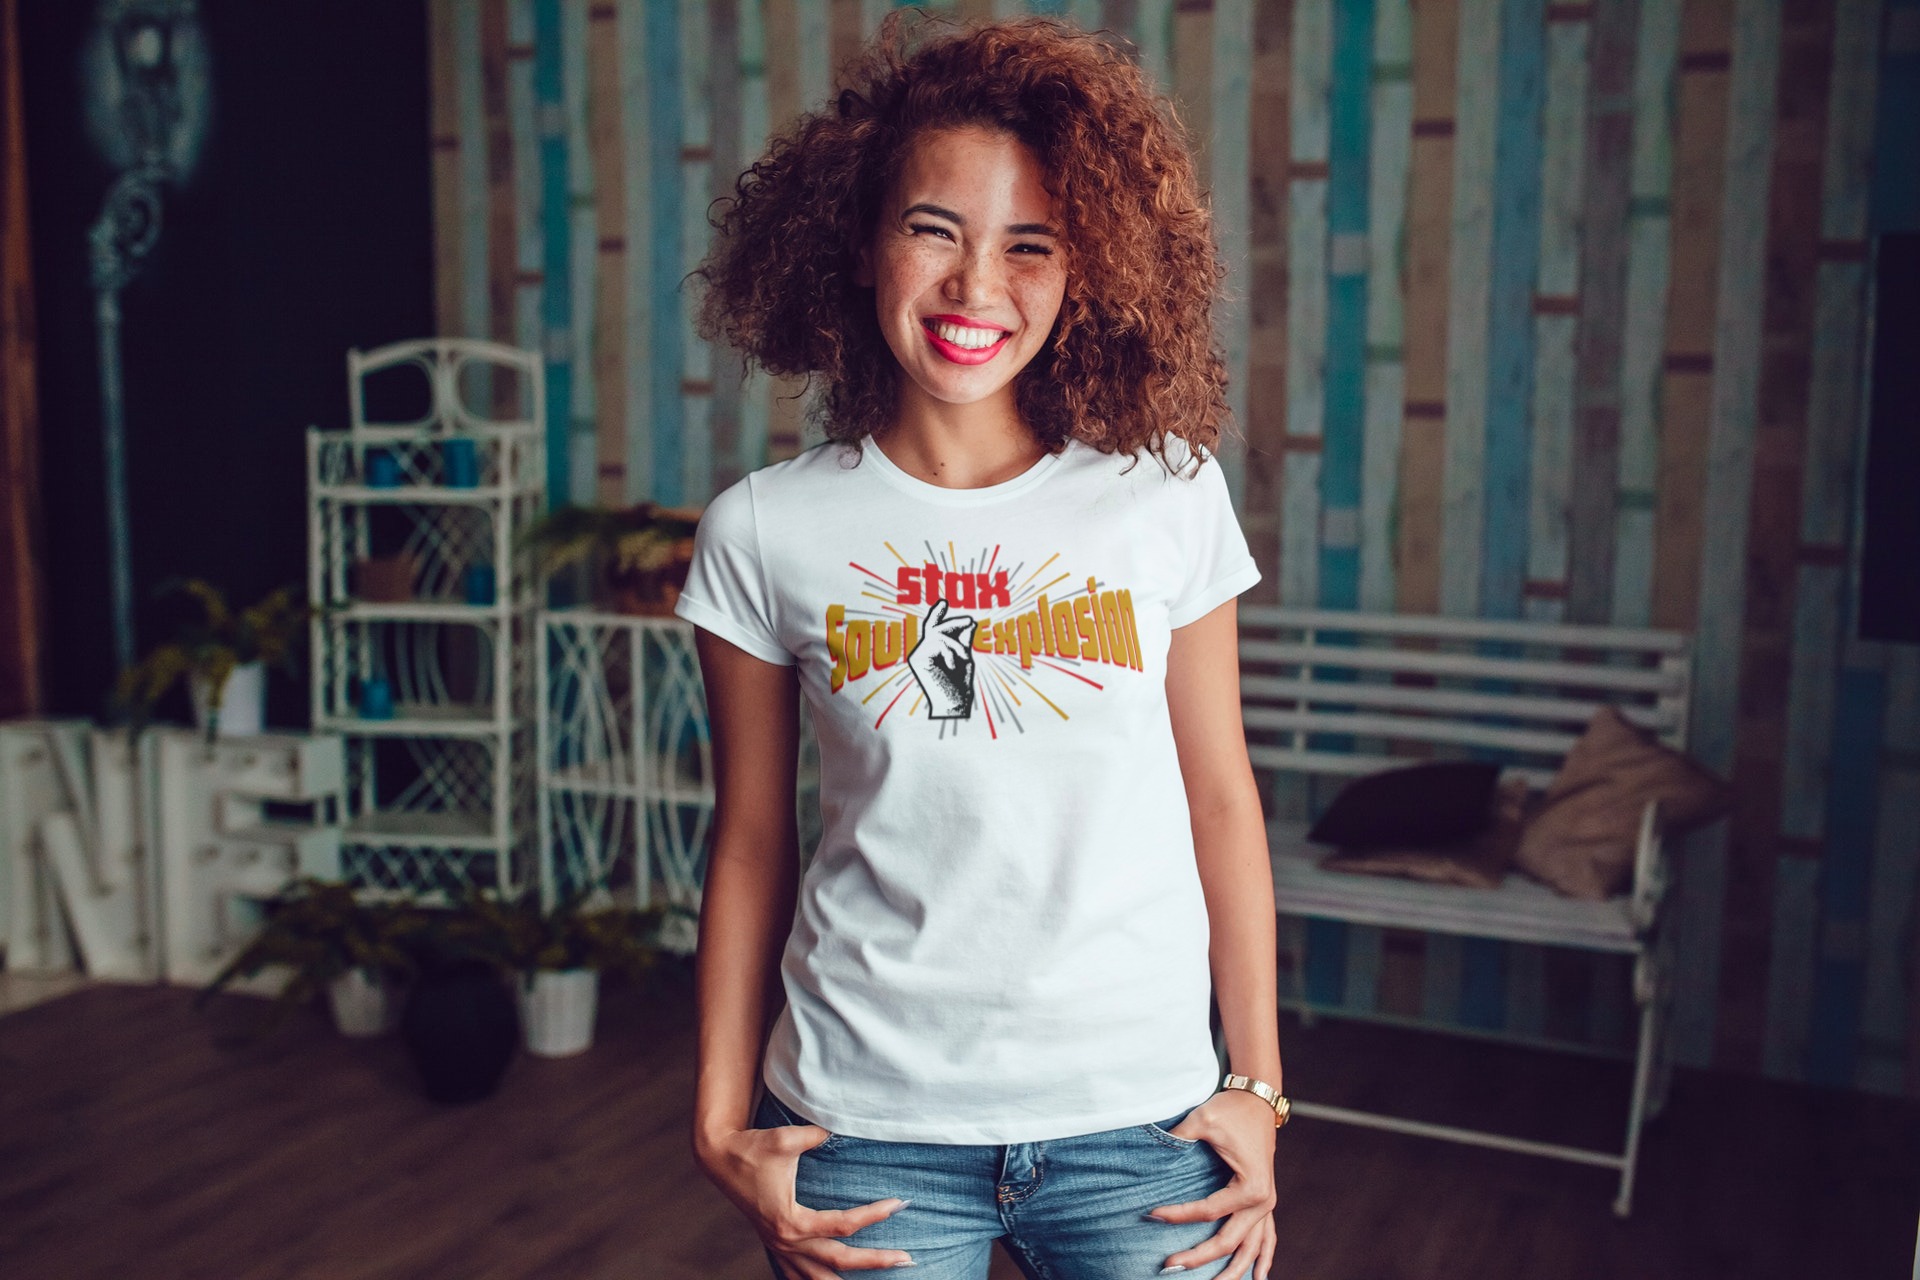 Stax Soul Explosion T-Shirt